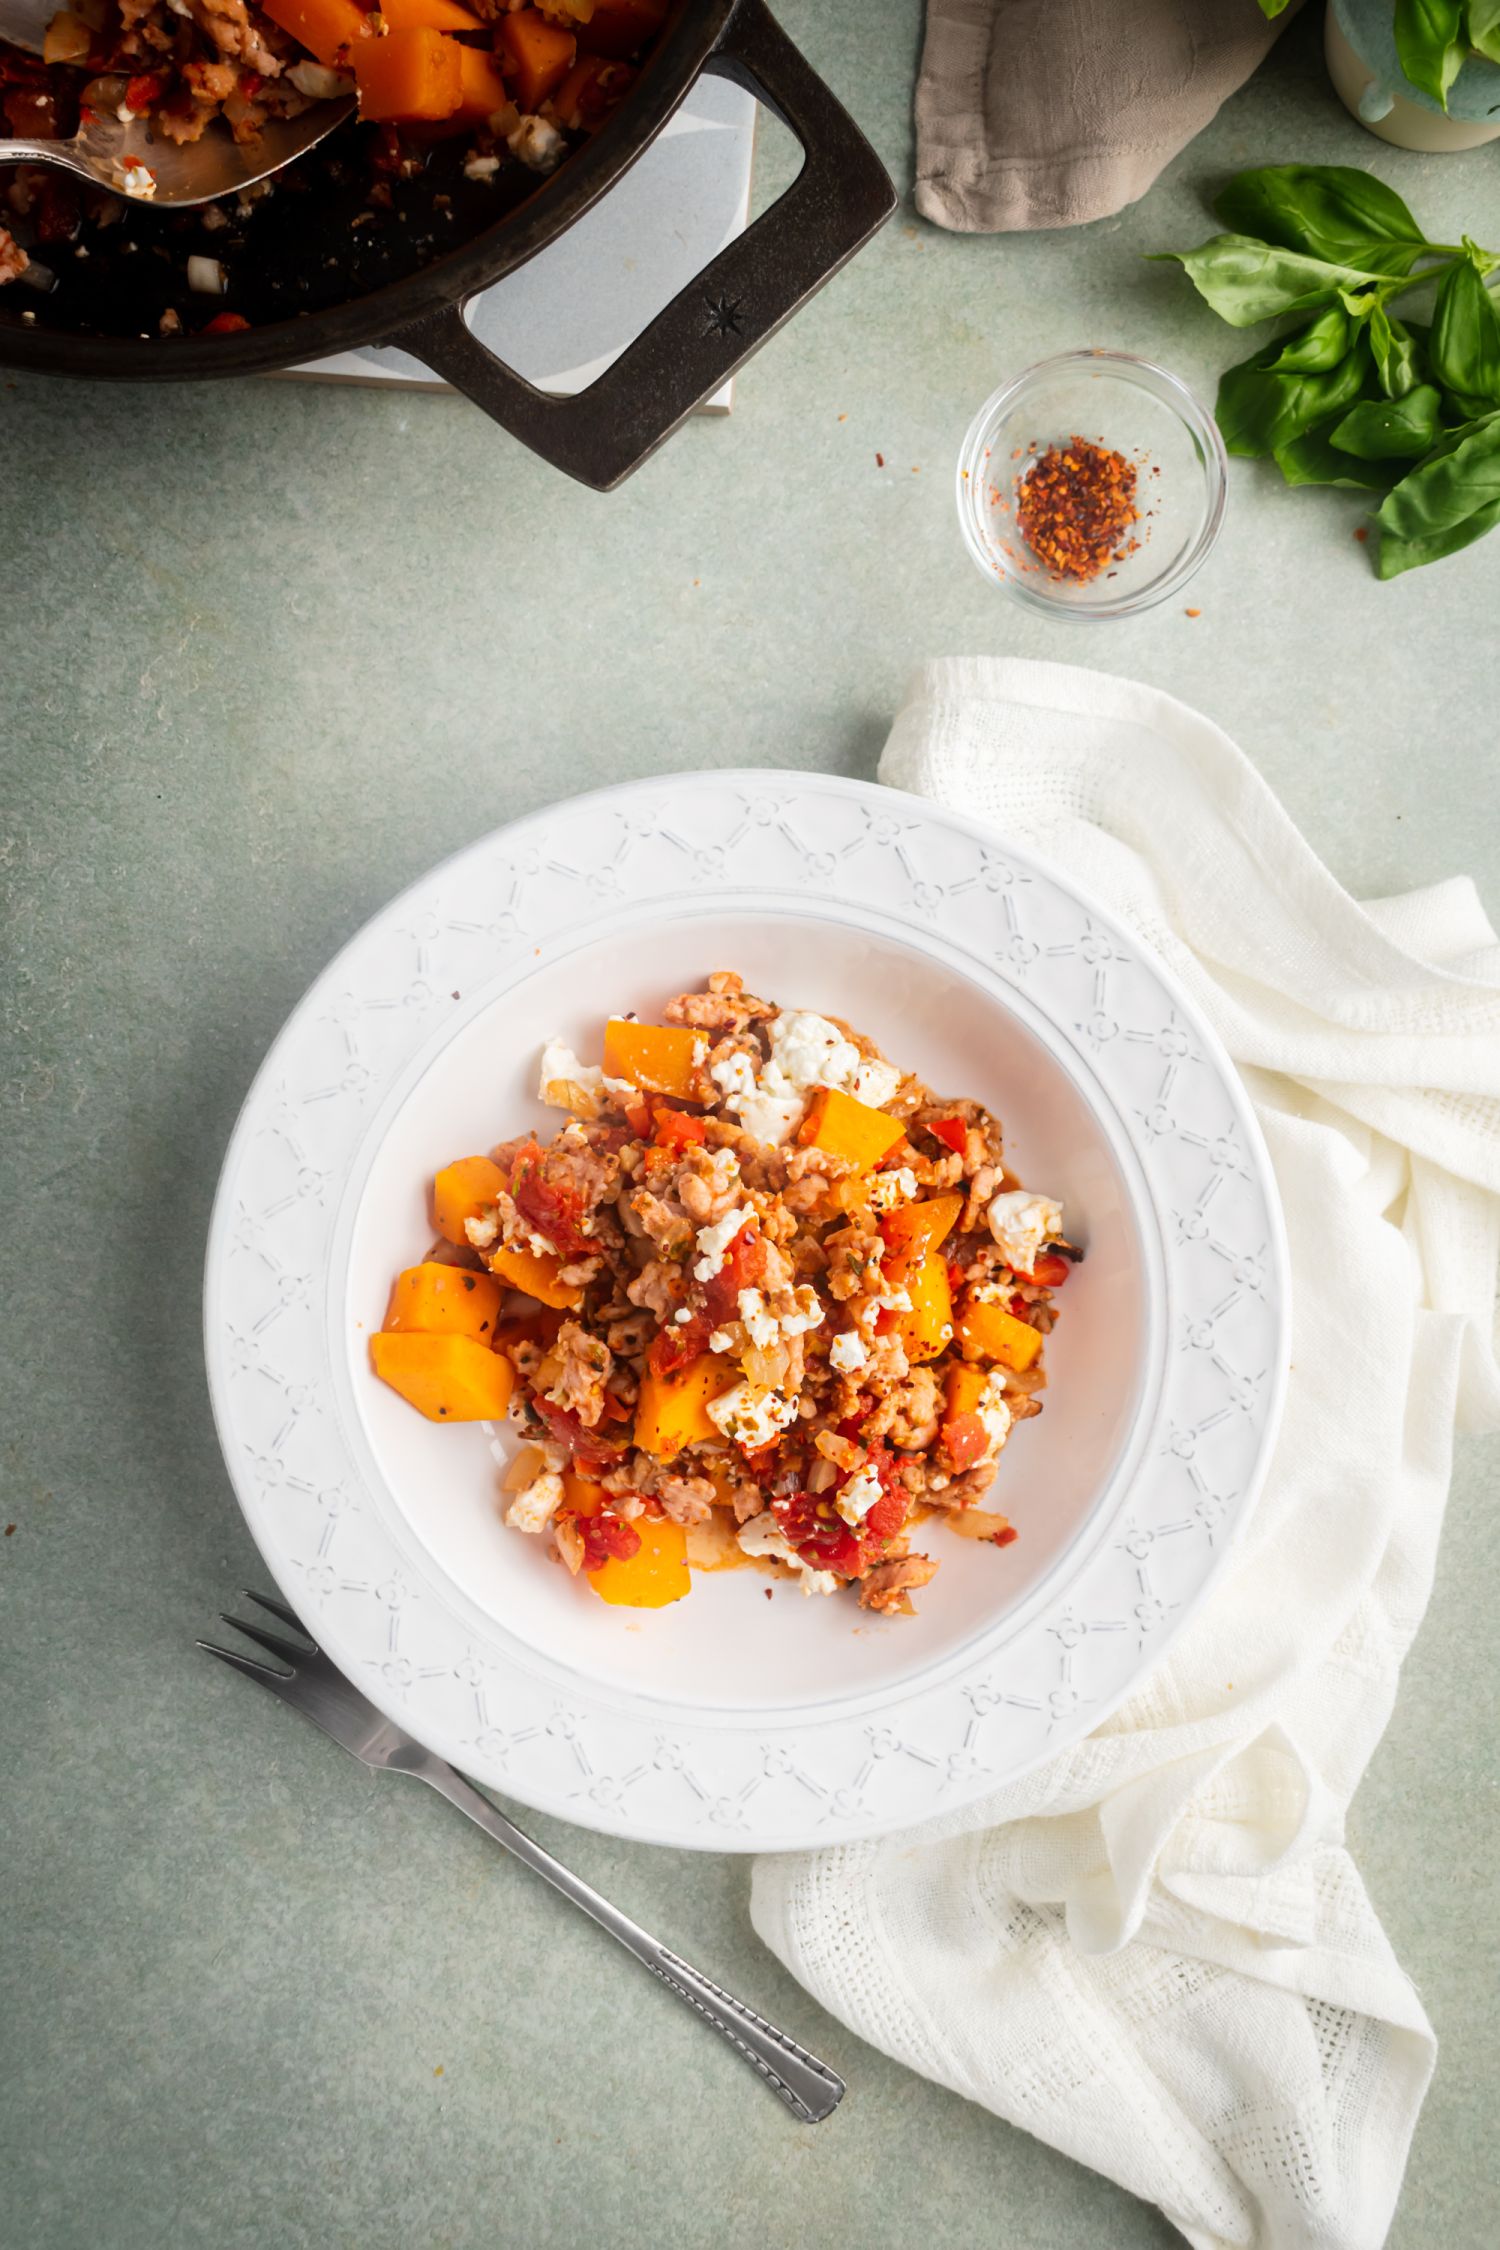 Butternut squash and ground turkey cooked with tomatoes, spices, and feta cheese in a white bowl.